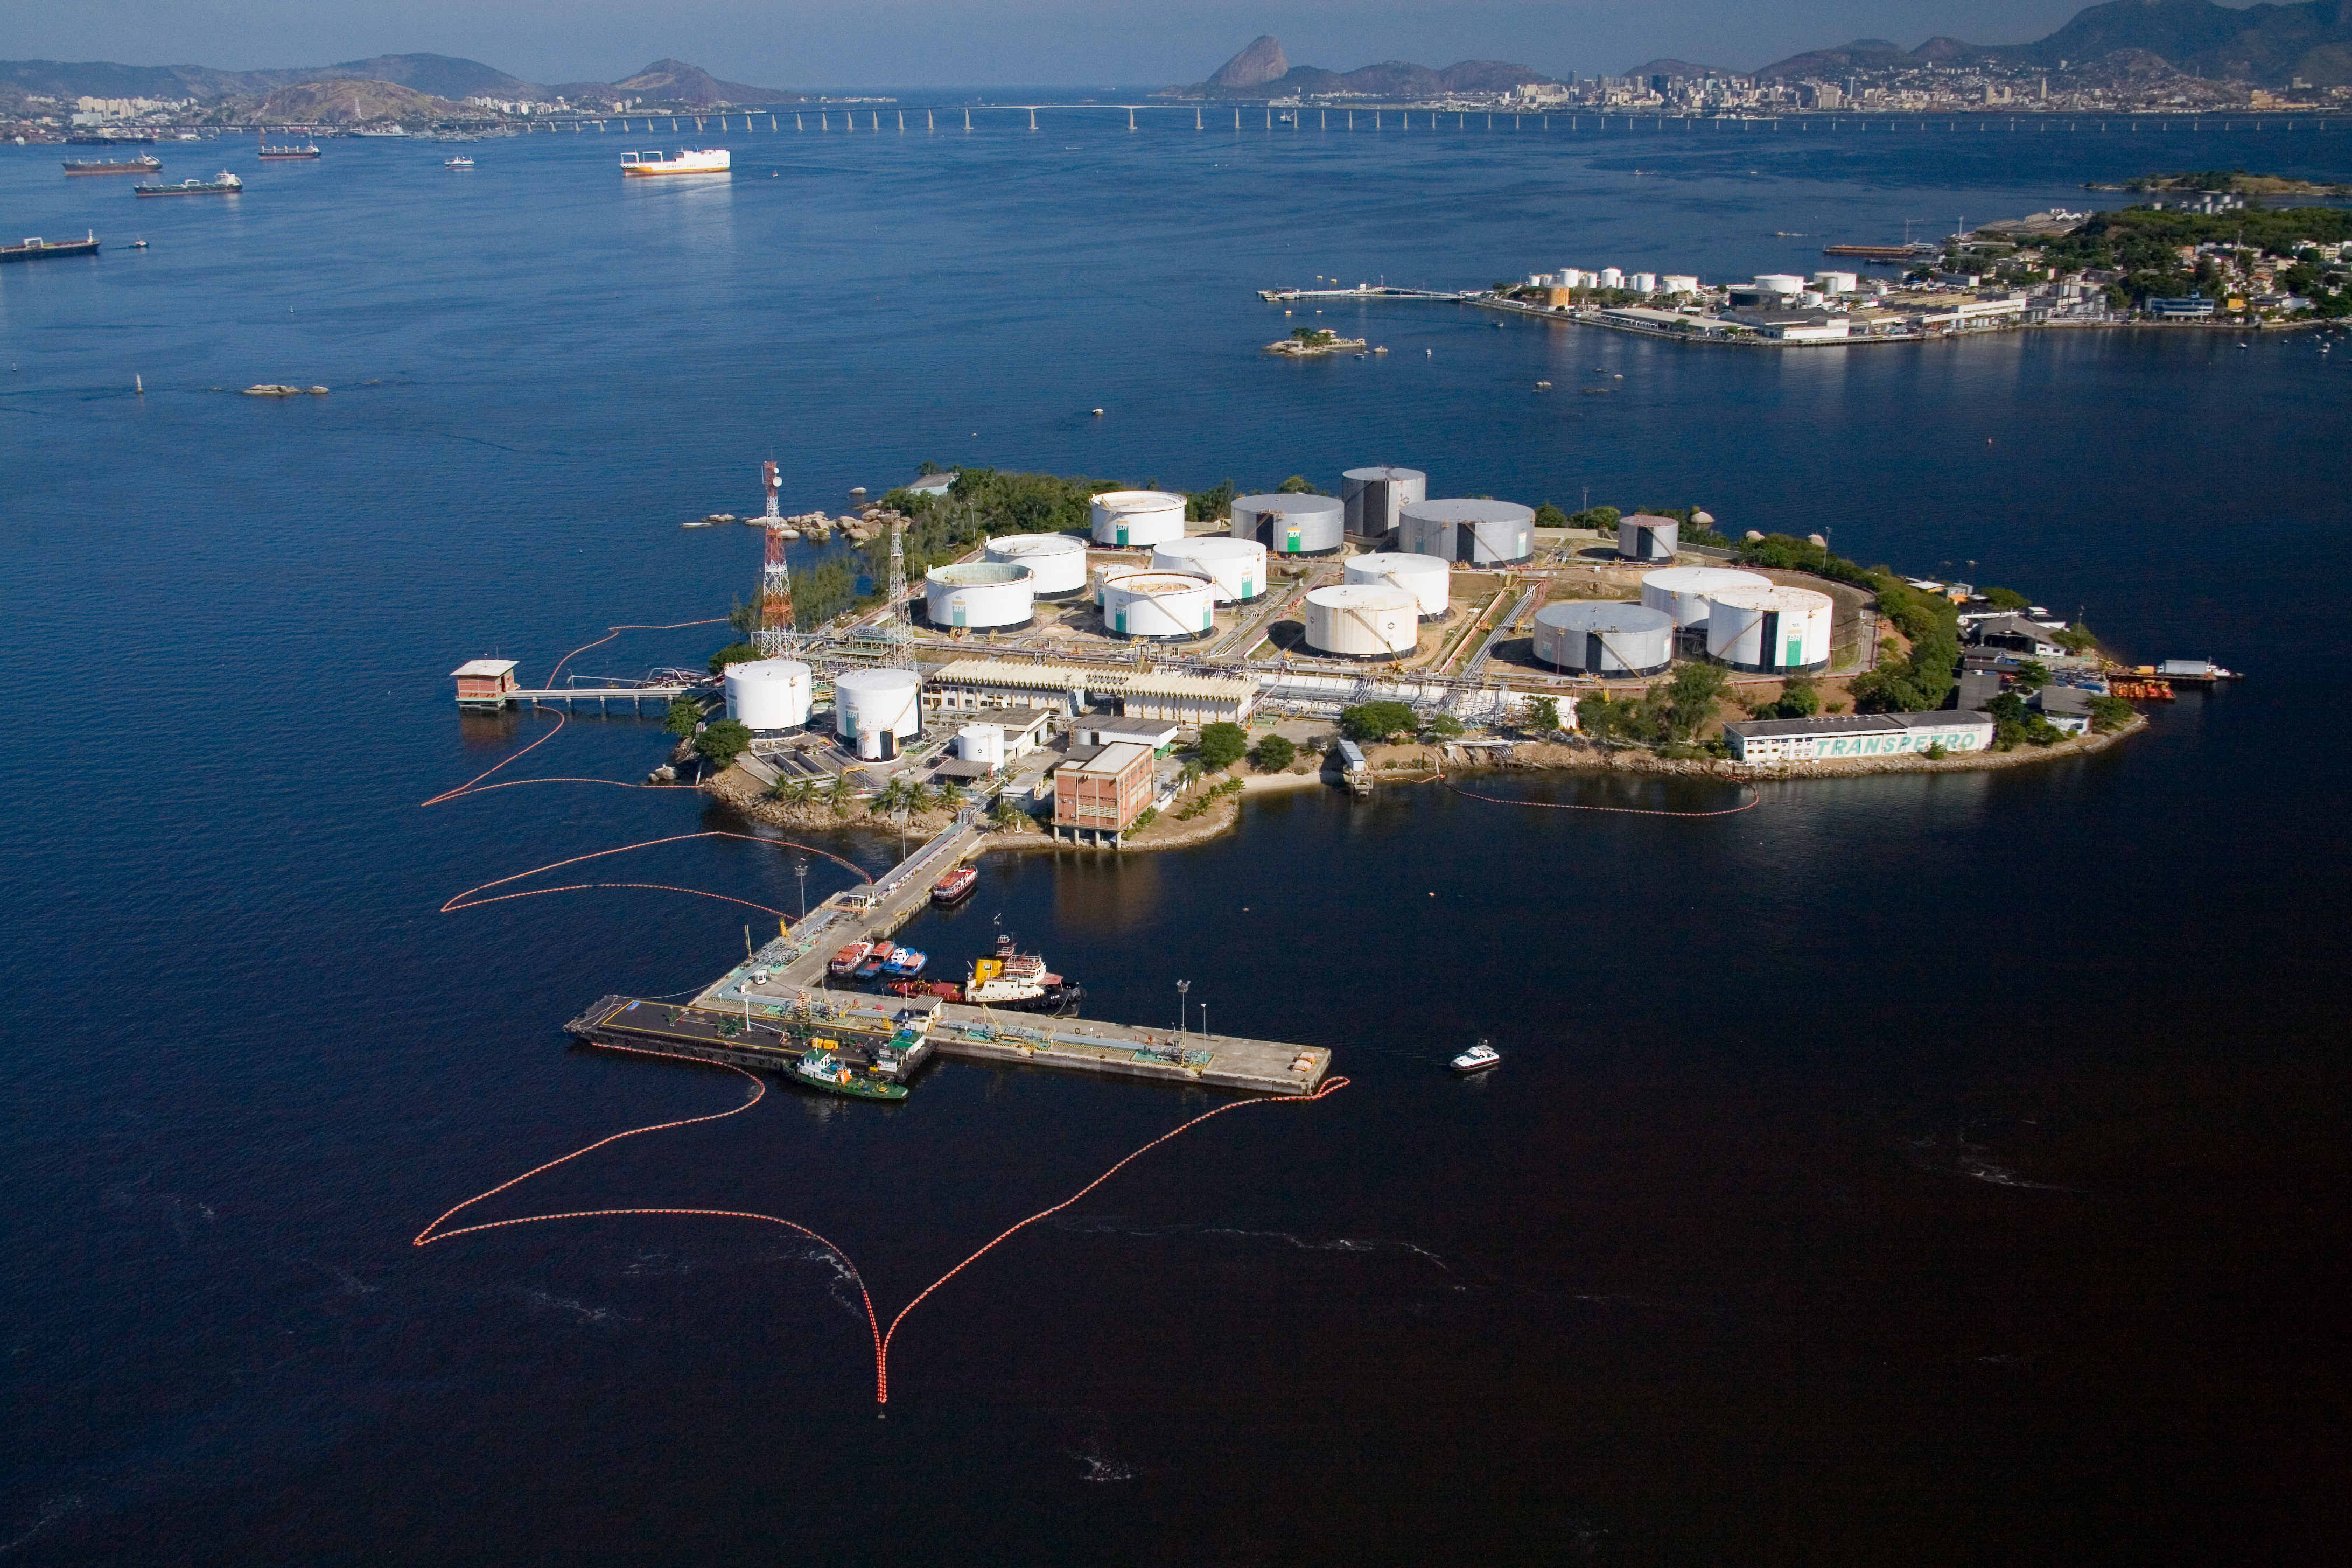 Our port activities are recognized by Federal Government award